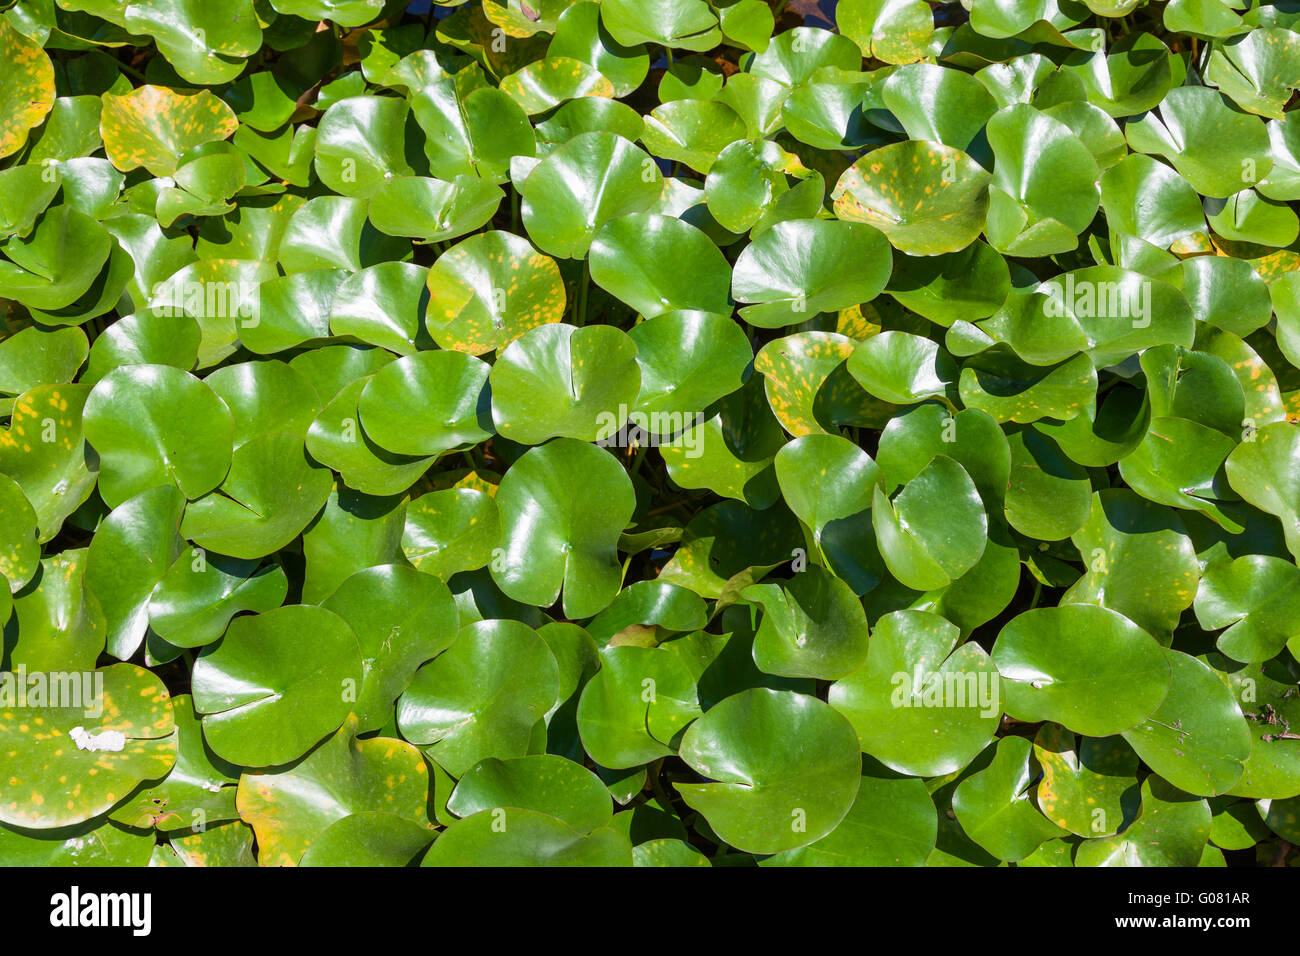 Eichhornia crassipes or water hyacinth problematic invasive species outside its native range Stock Photo